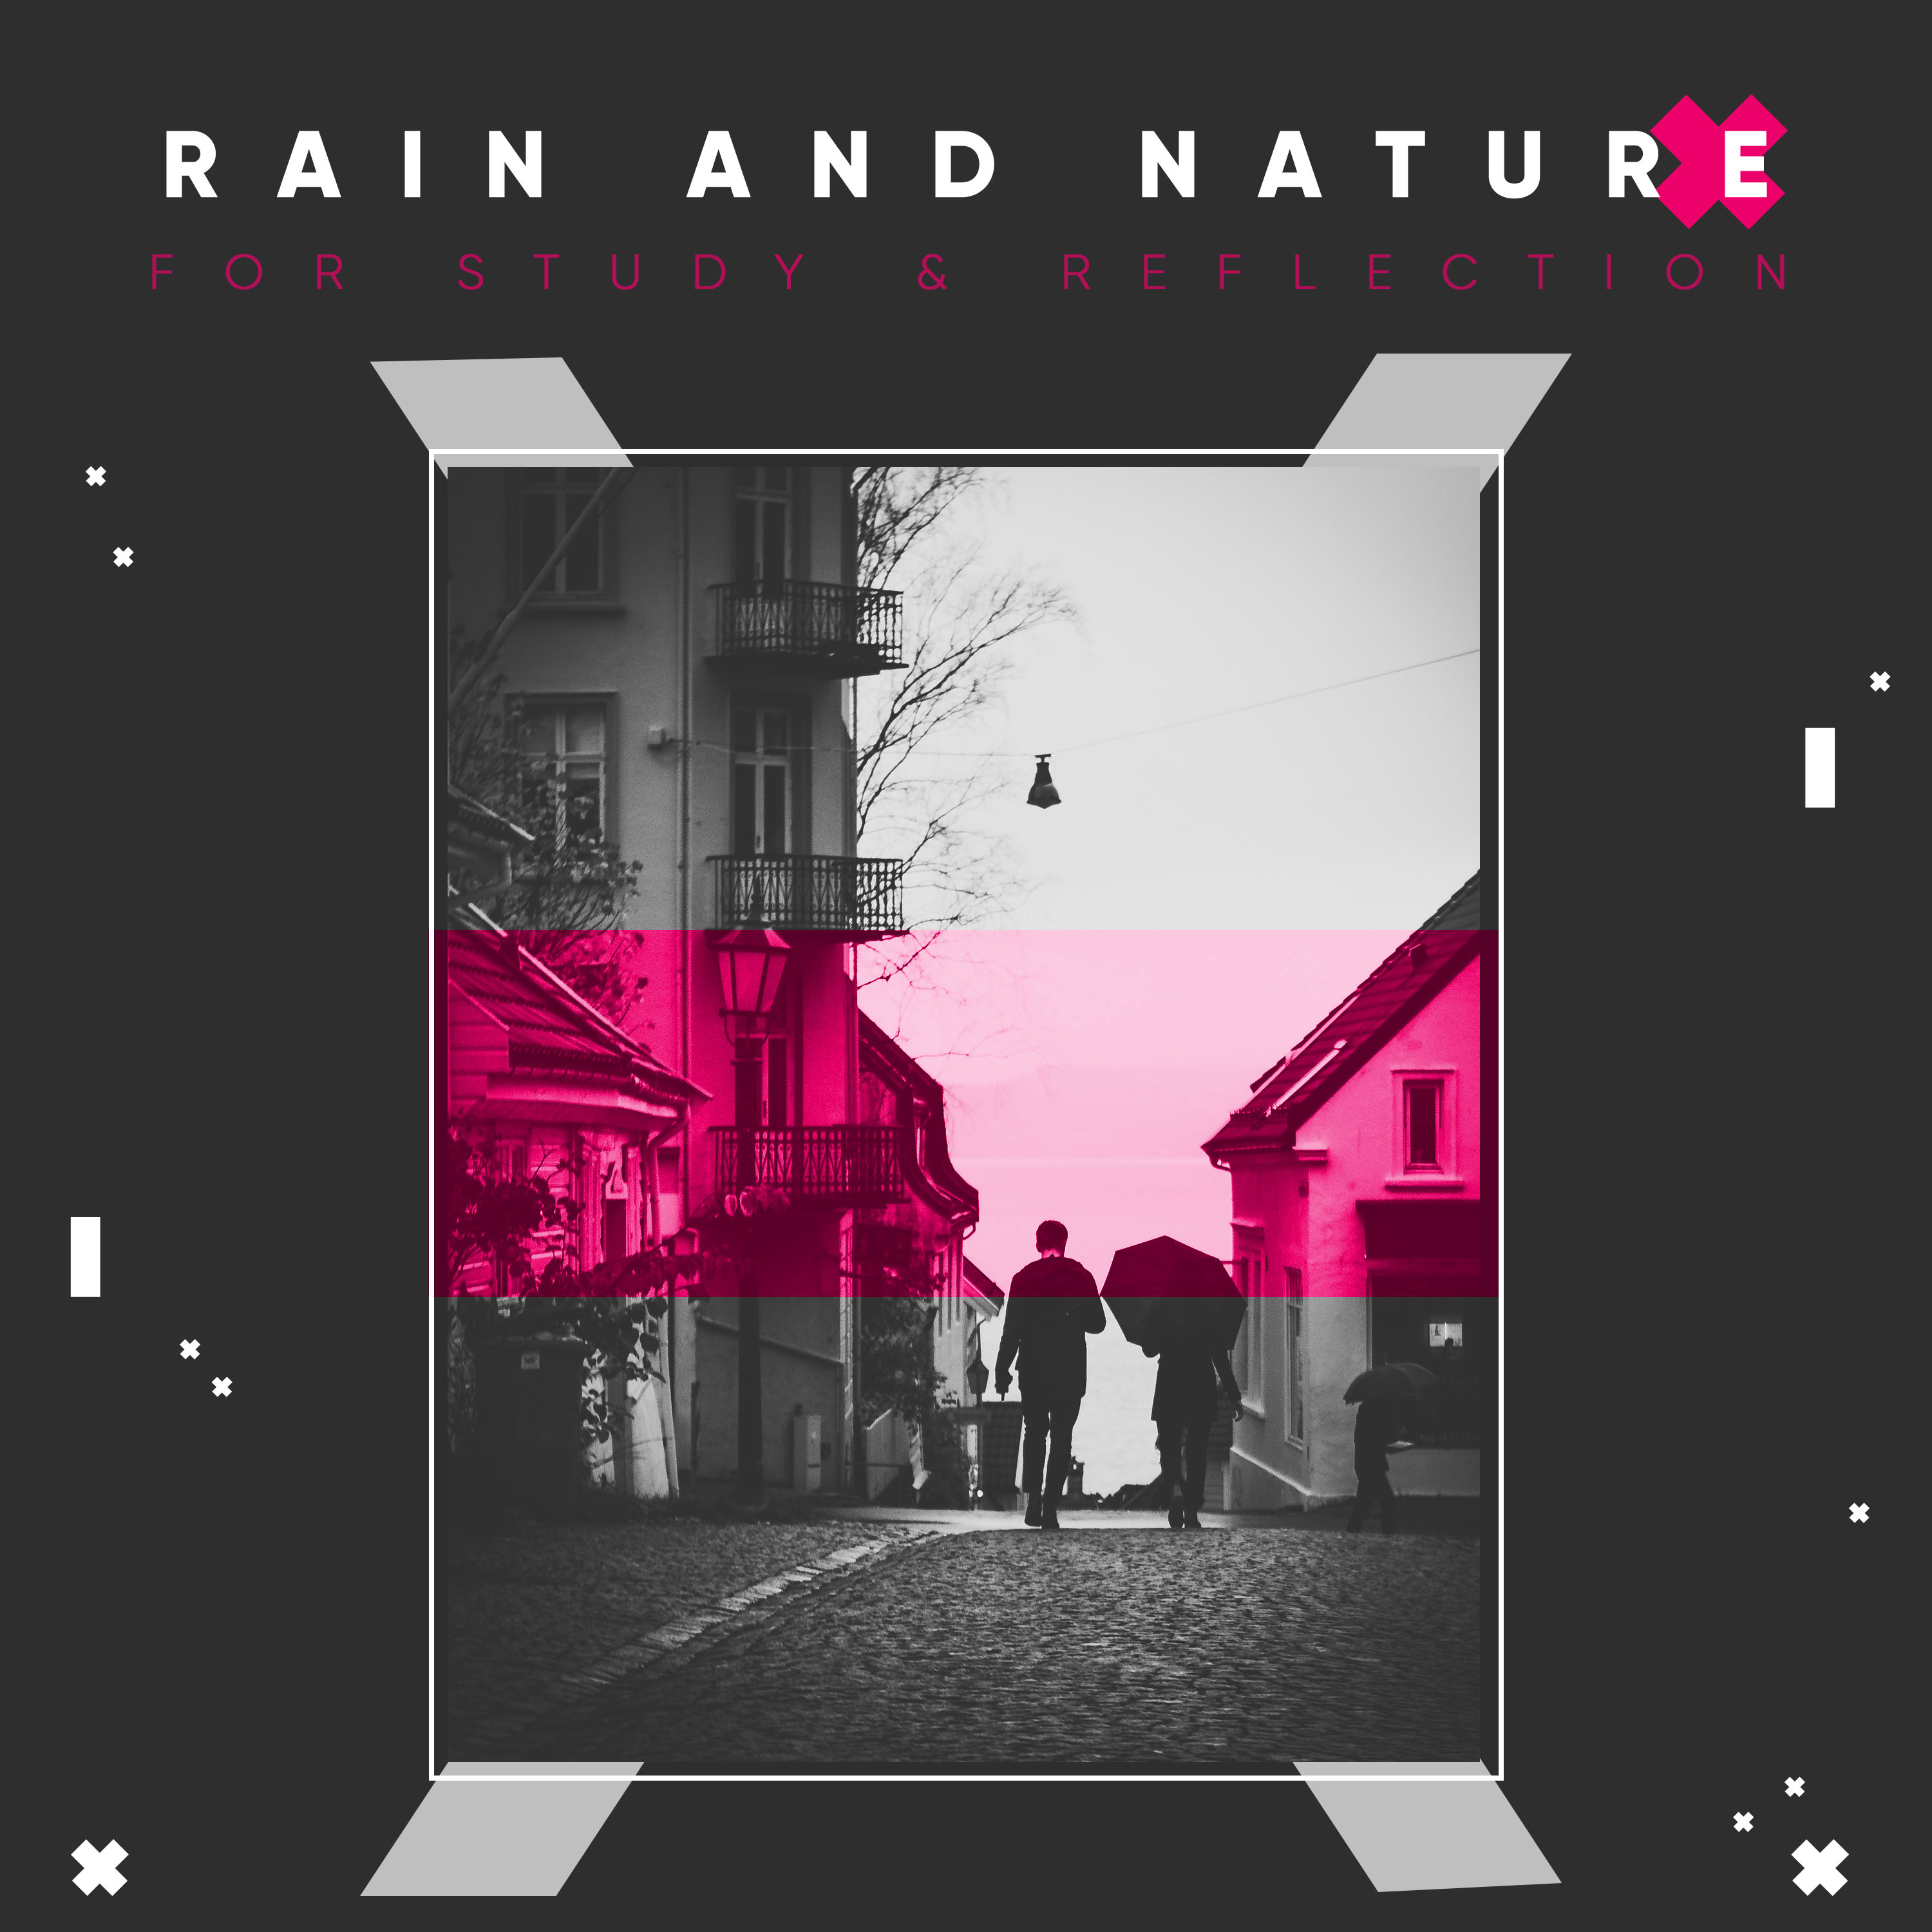 #20 Rain and Nature Noises for Study & Reflection